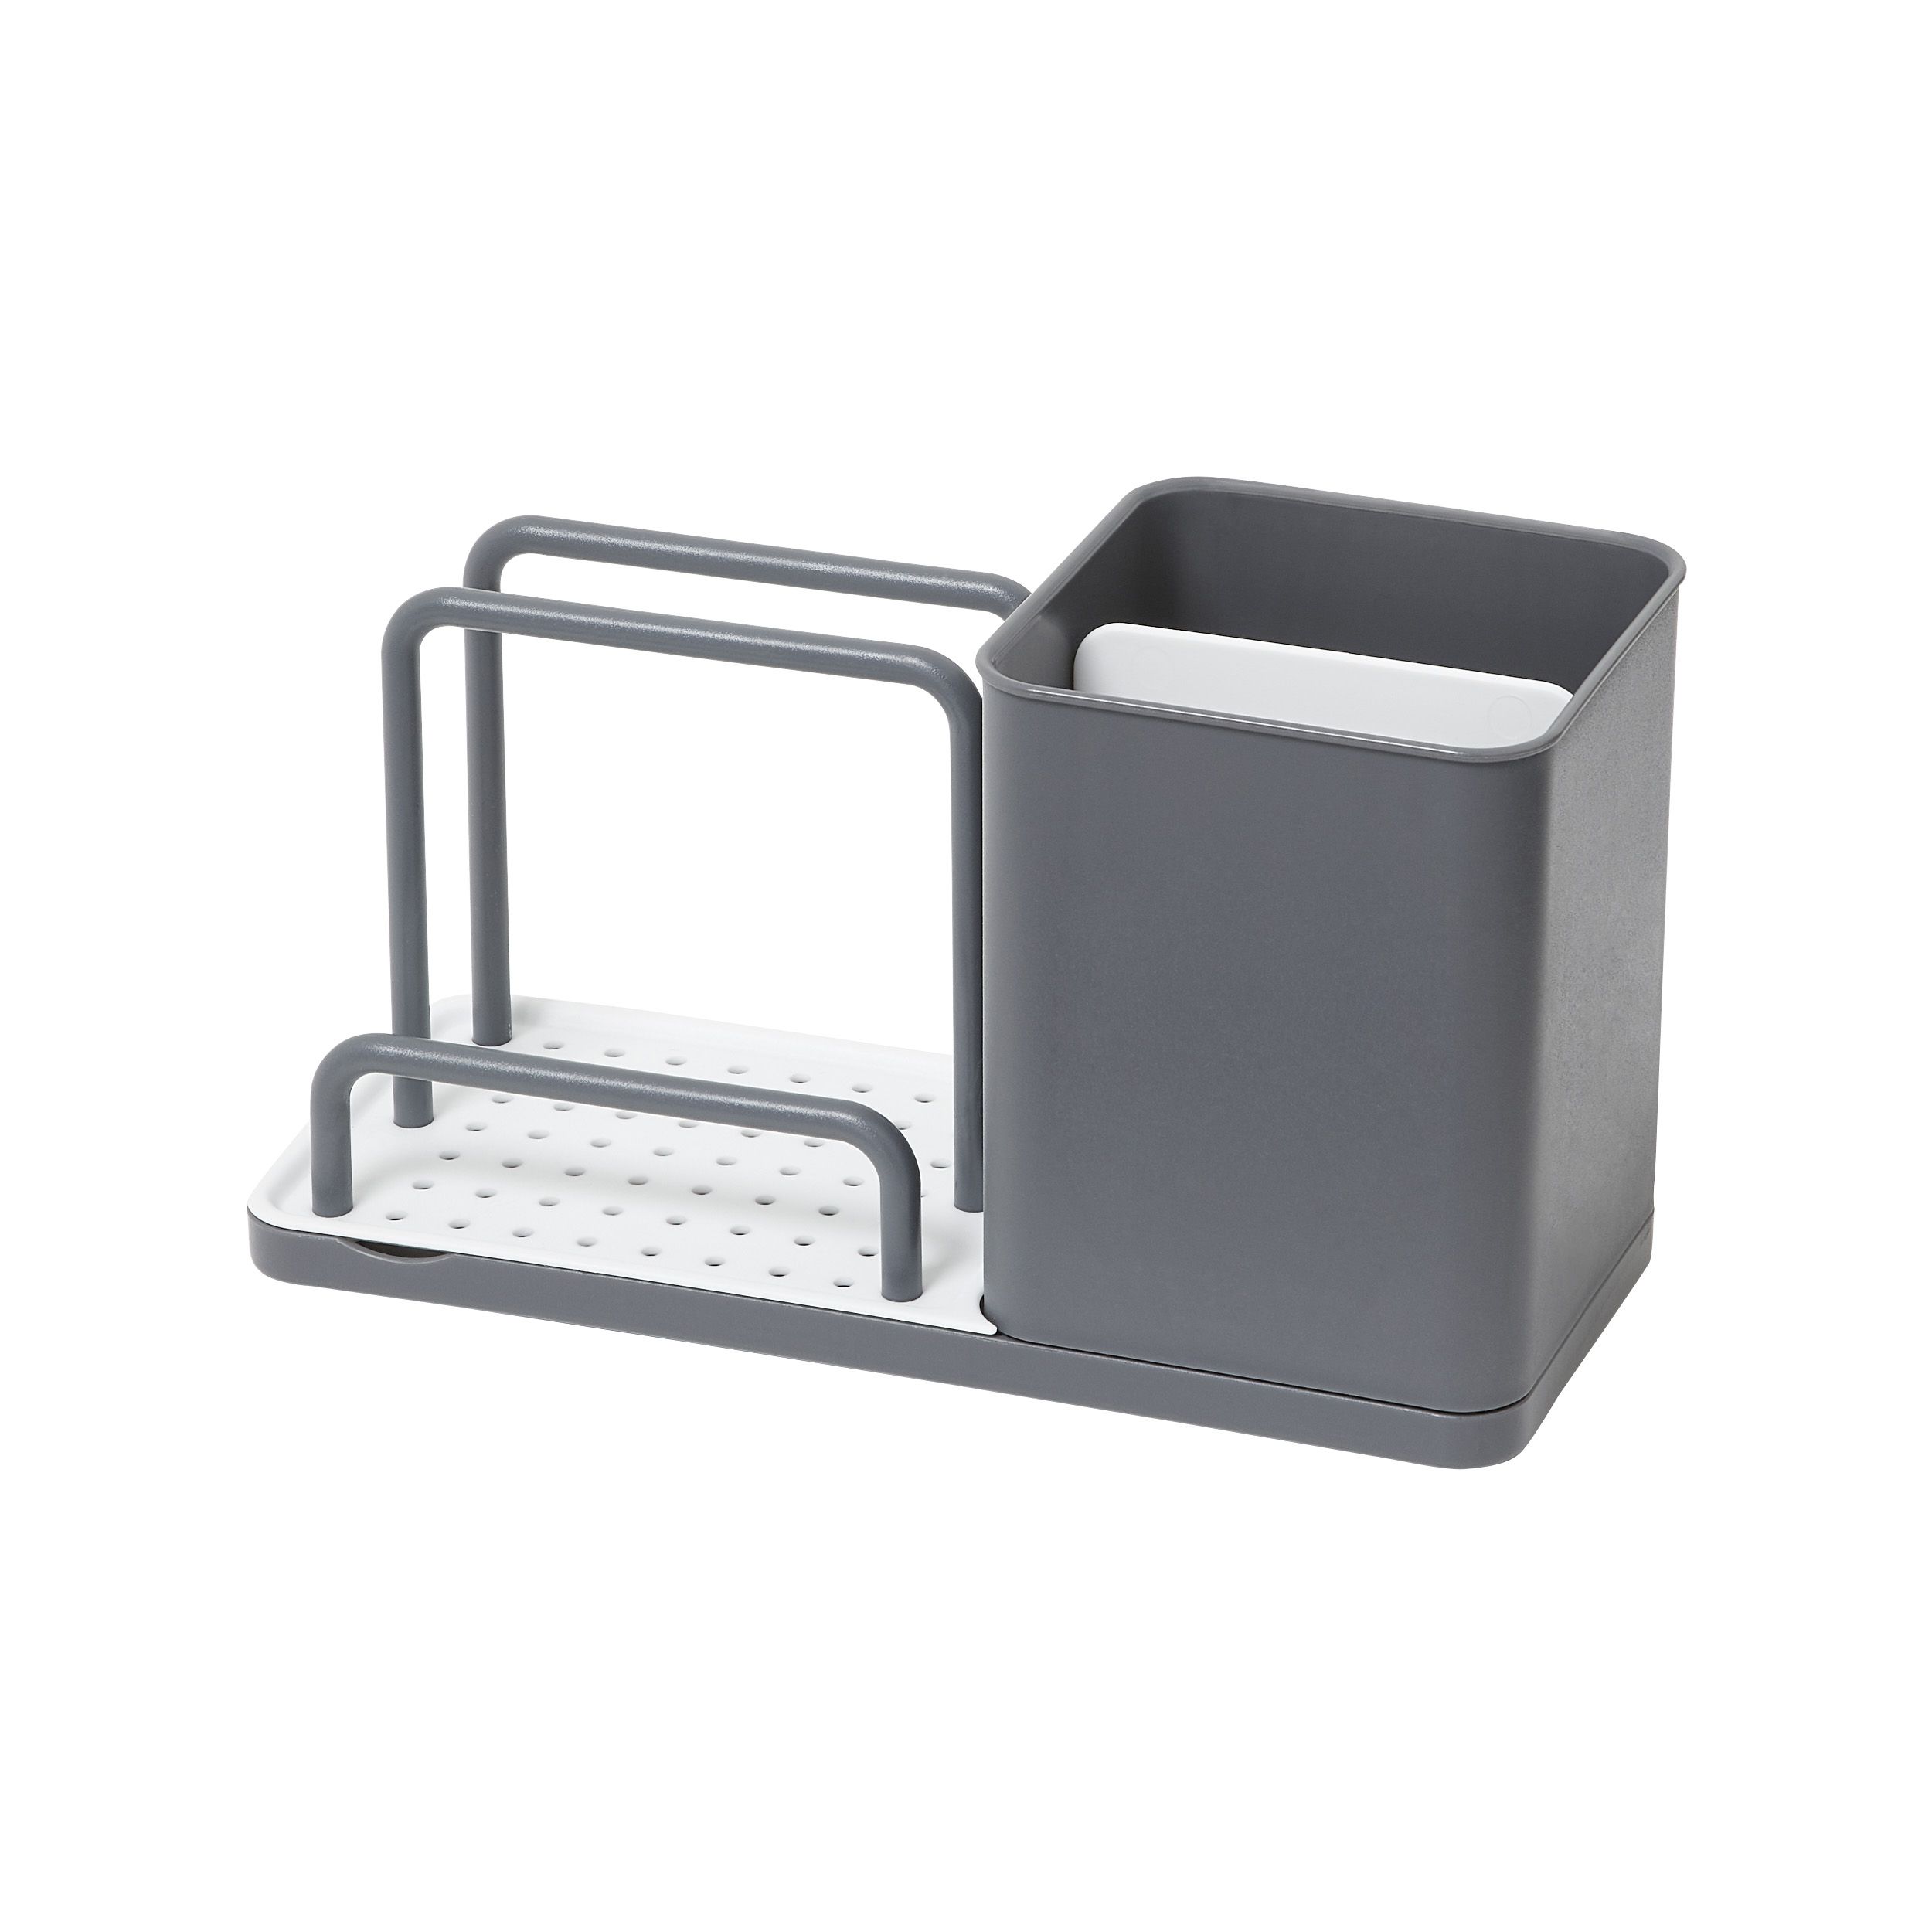 https://media.diy.com/is/image/Kingfisher/goodhome-datil-anthracite-sink-caddy-h-112mm-w-90mm~3663602633693_01c_bq?$MOB_PREV$&$width=768&$height=768